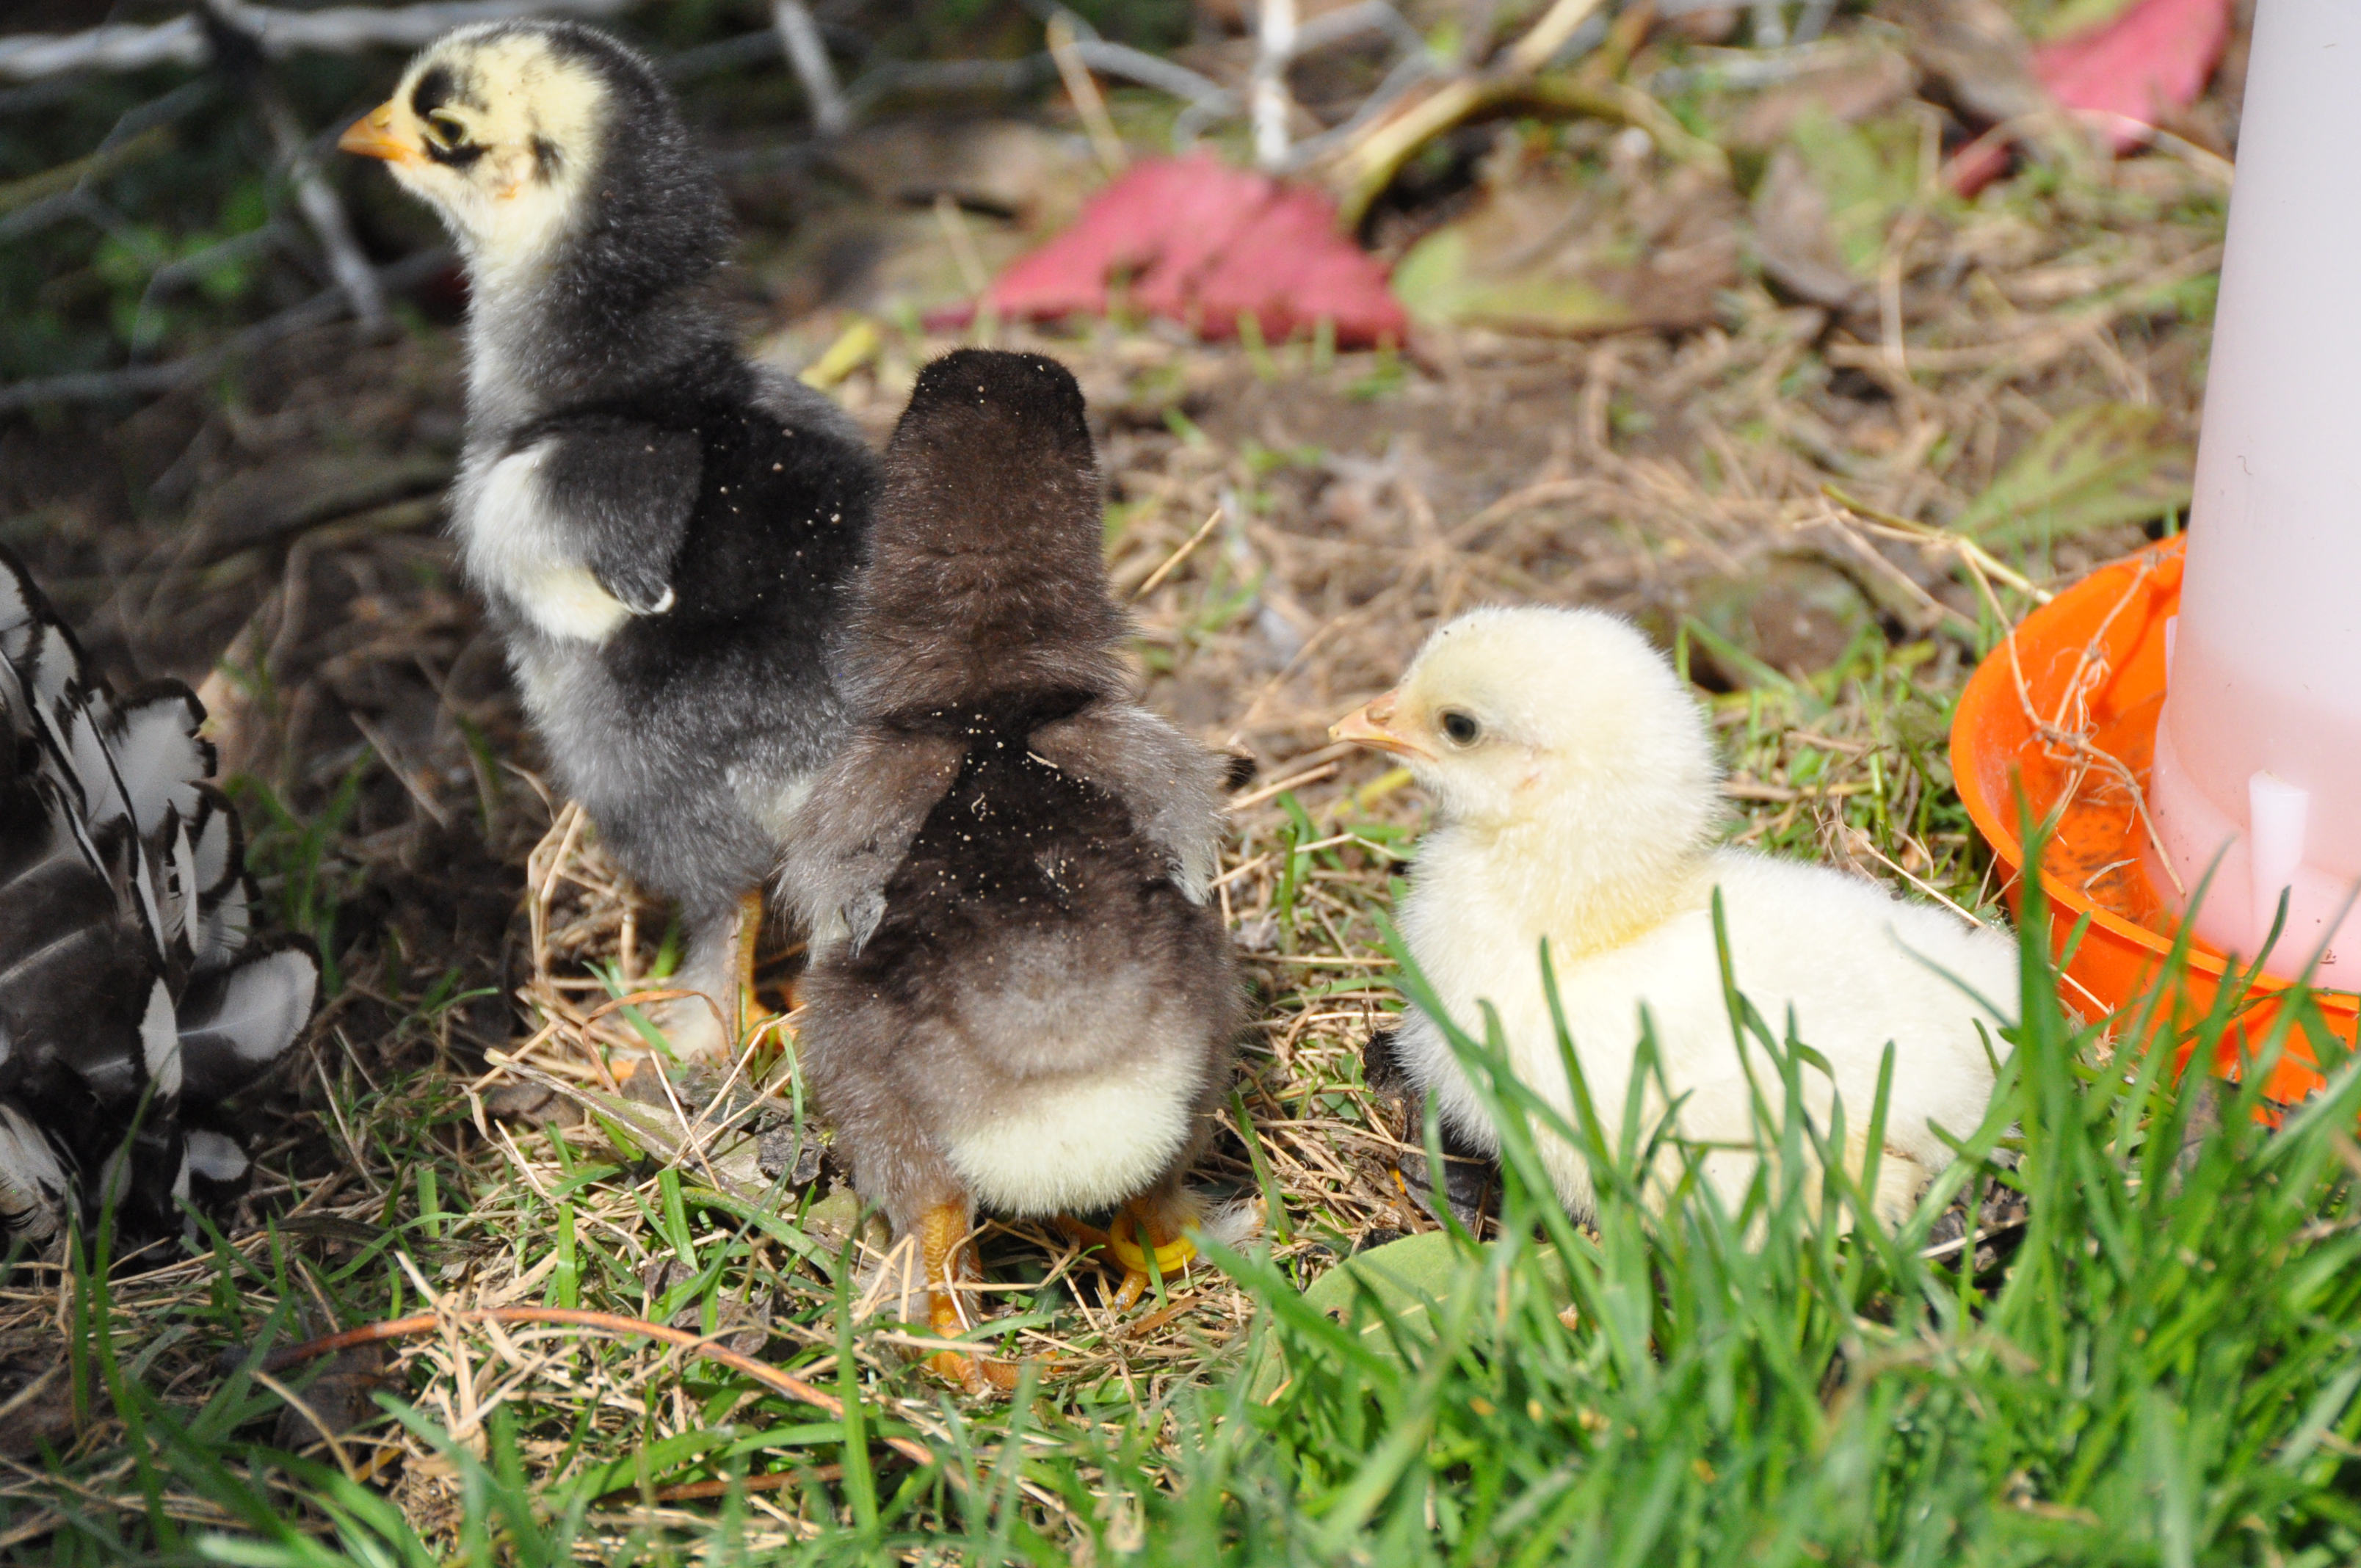 Baby chicks out in the sun